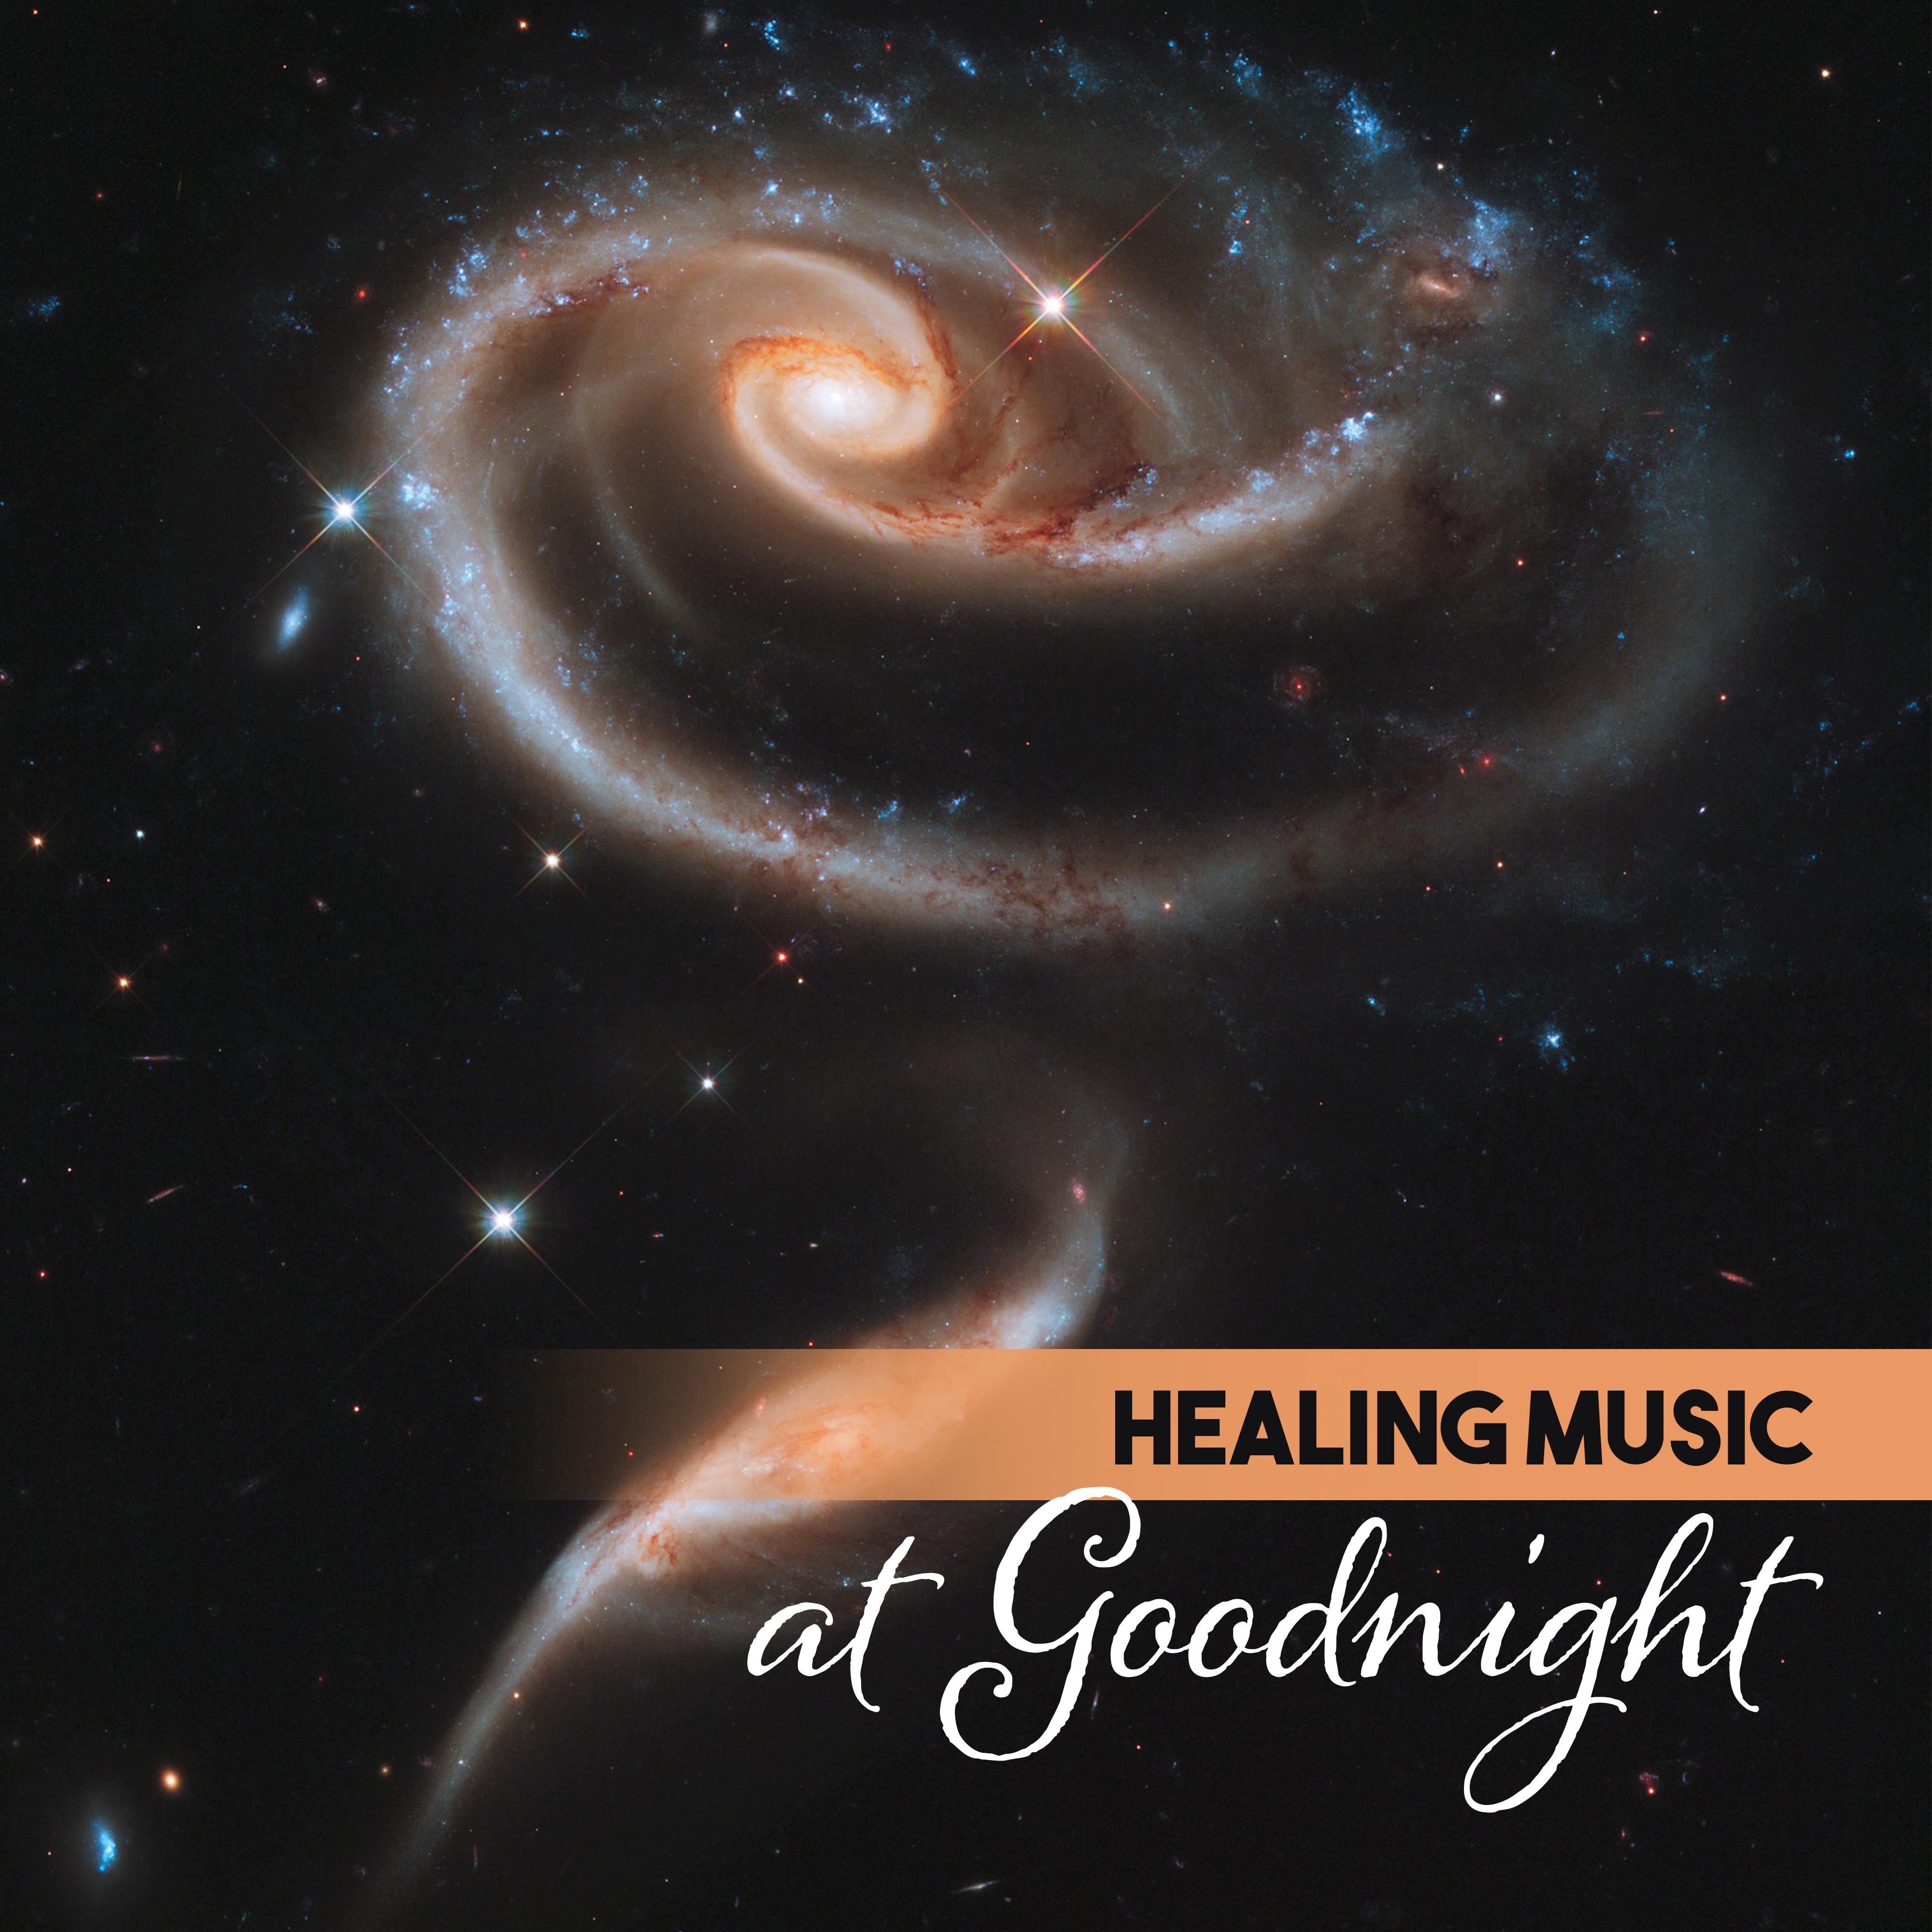 Healing Music at Goodnight  Relaxing Lullabies for Sleep, Relief, Calm Dream, Music to Pillow, Bedtime, Peaceful Mind